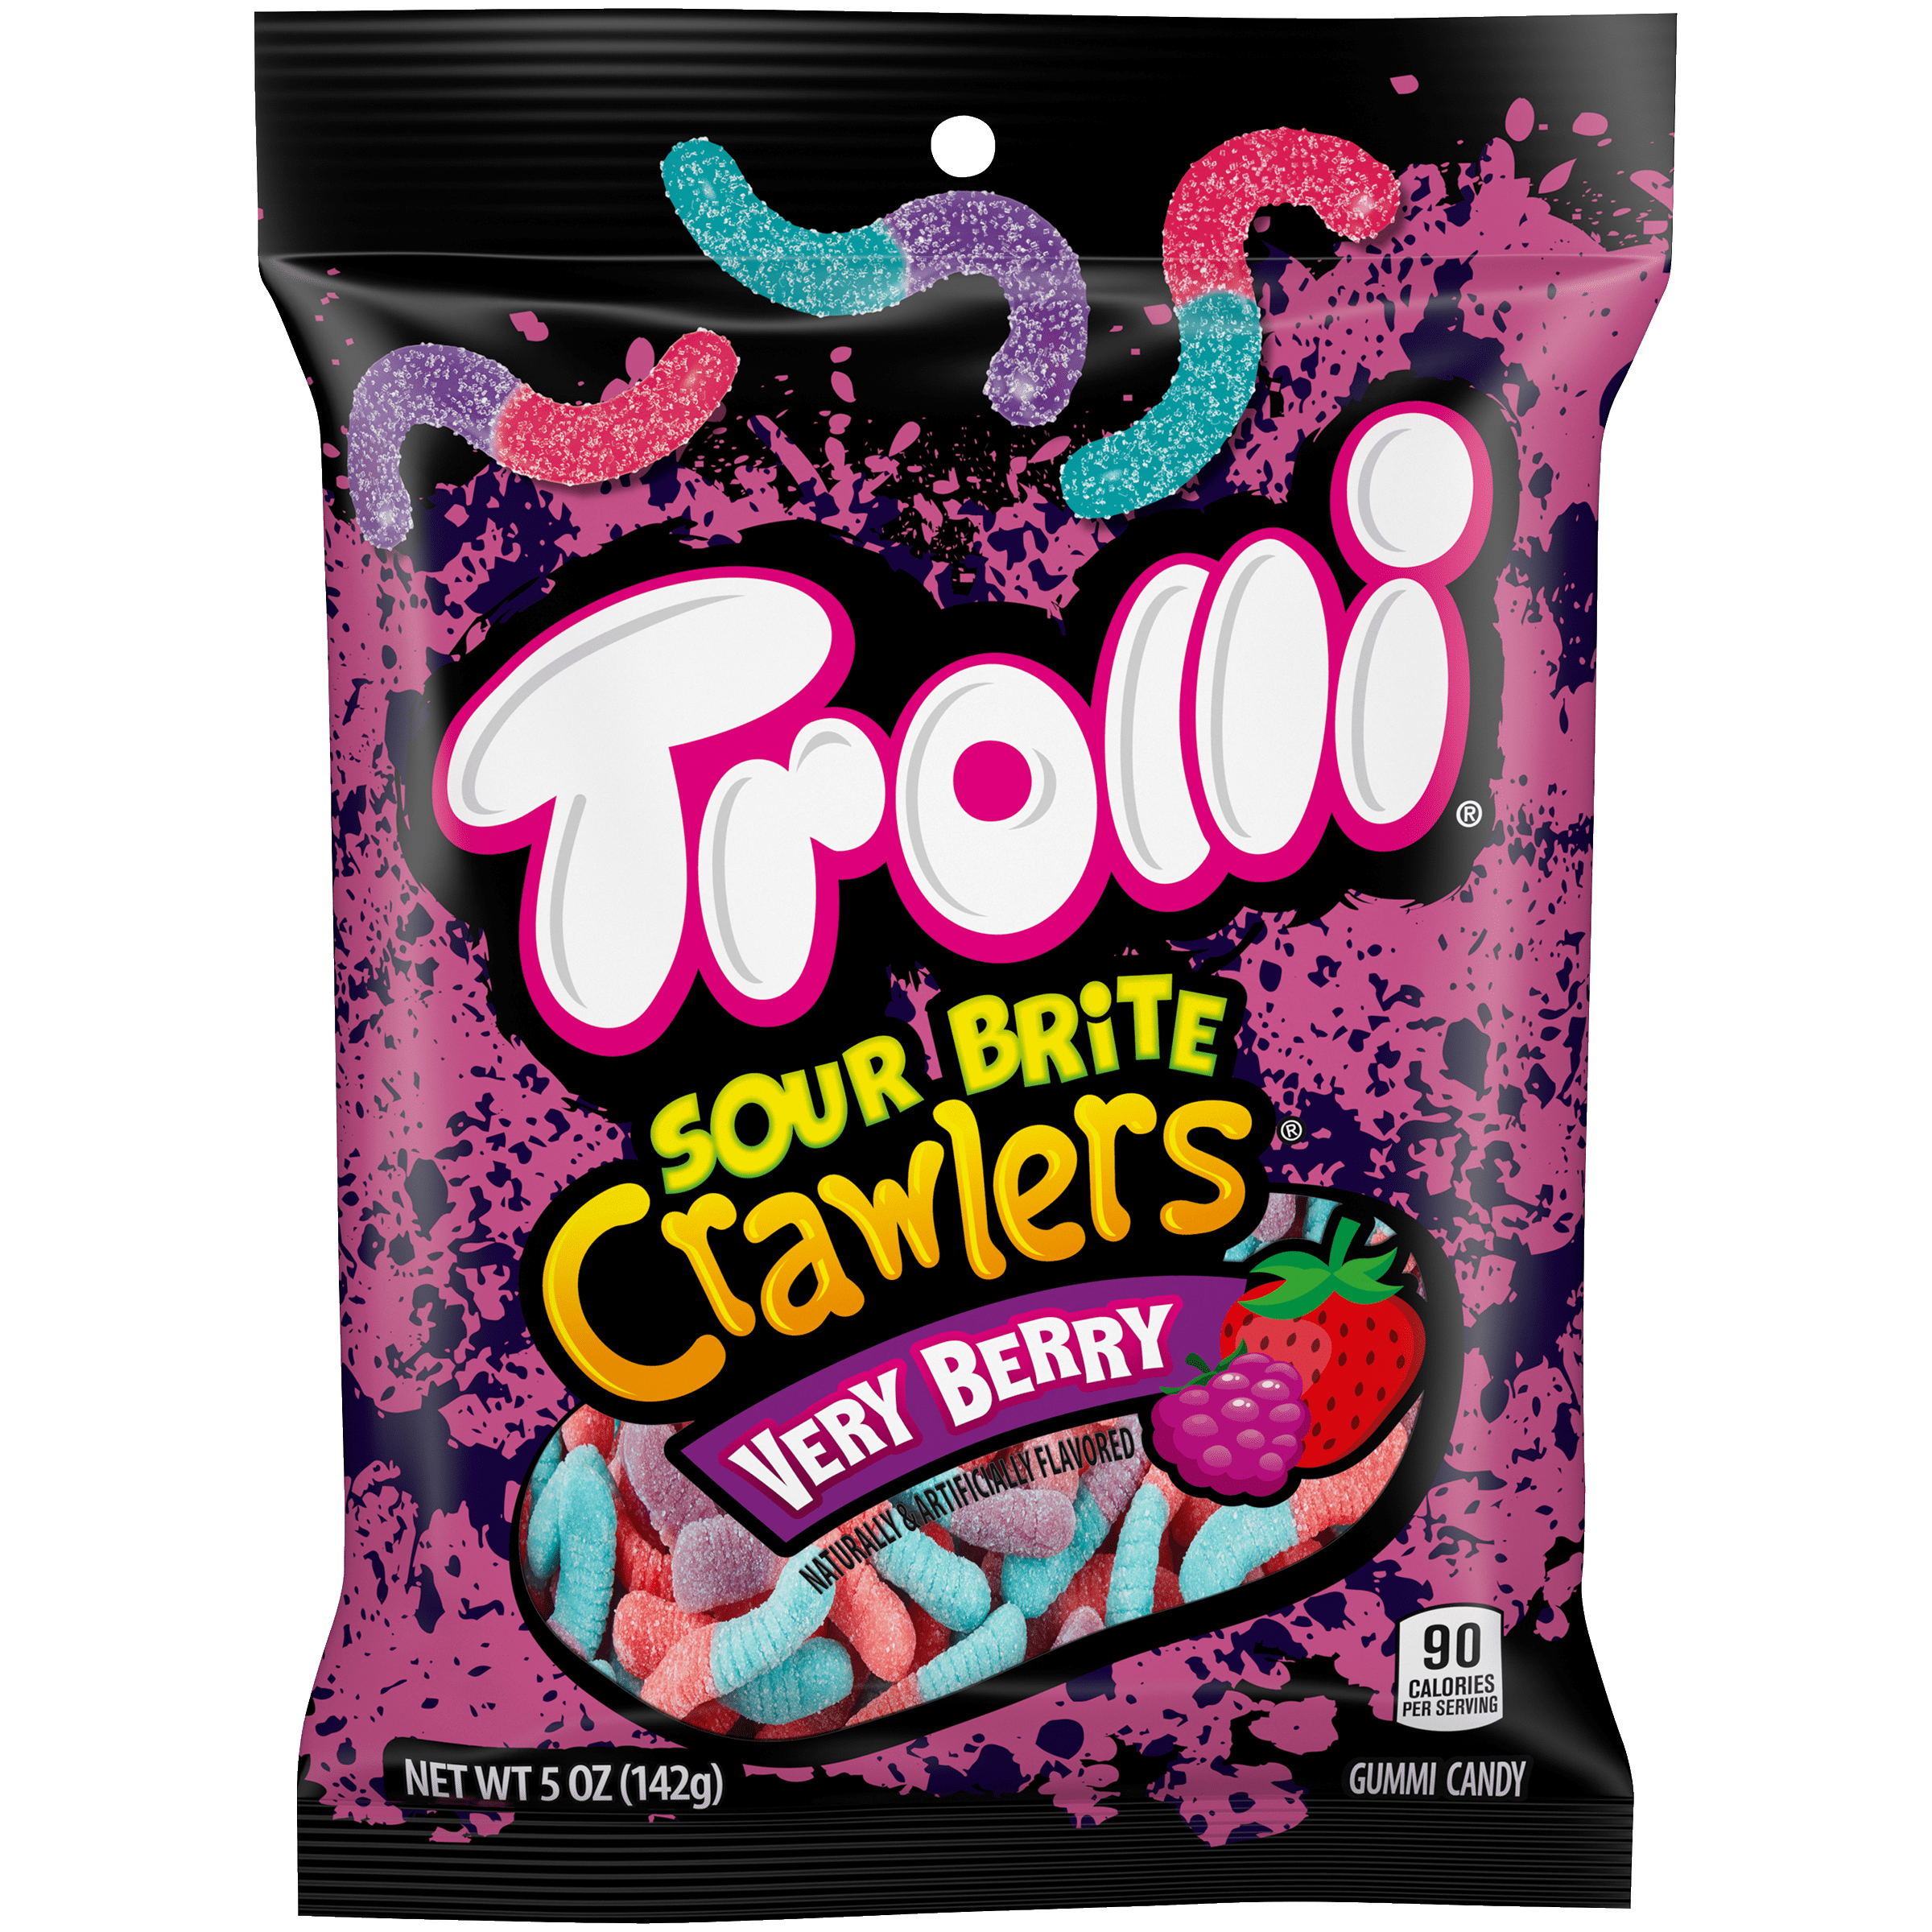 Trolli Sour Brite Crawlers Candy, Very Berry Sour Gummy Worms, 5